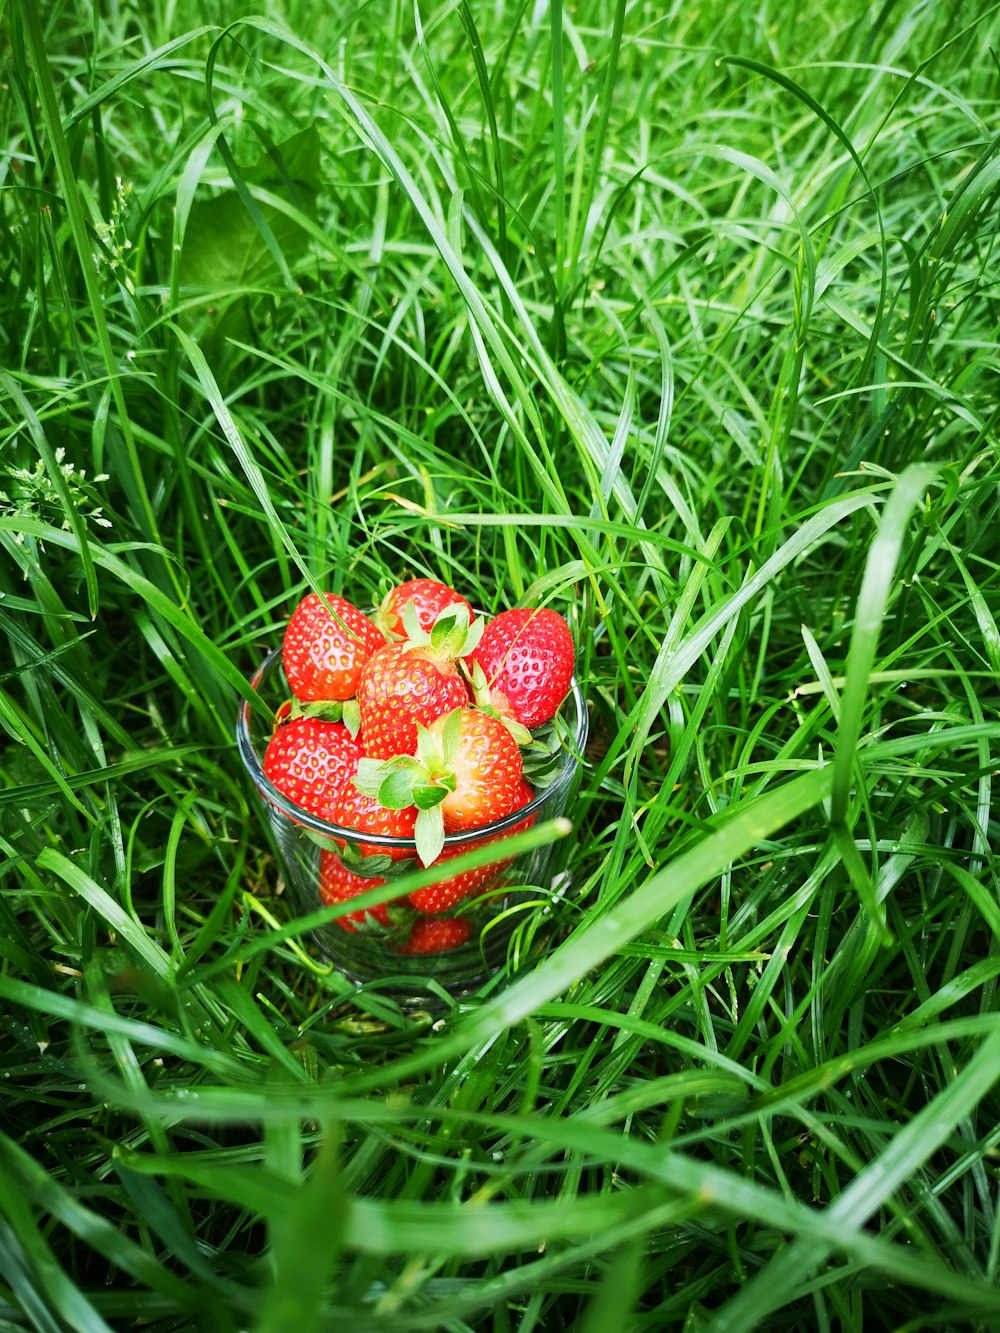 strawberries in clear glass bowl on green grass